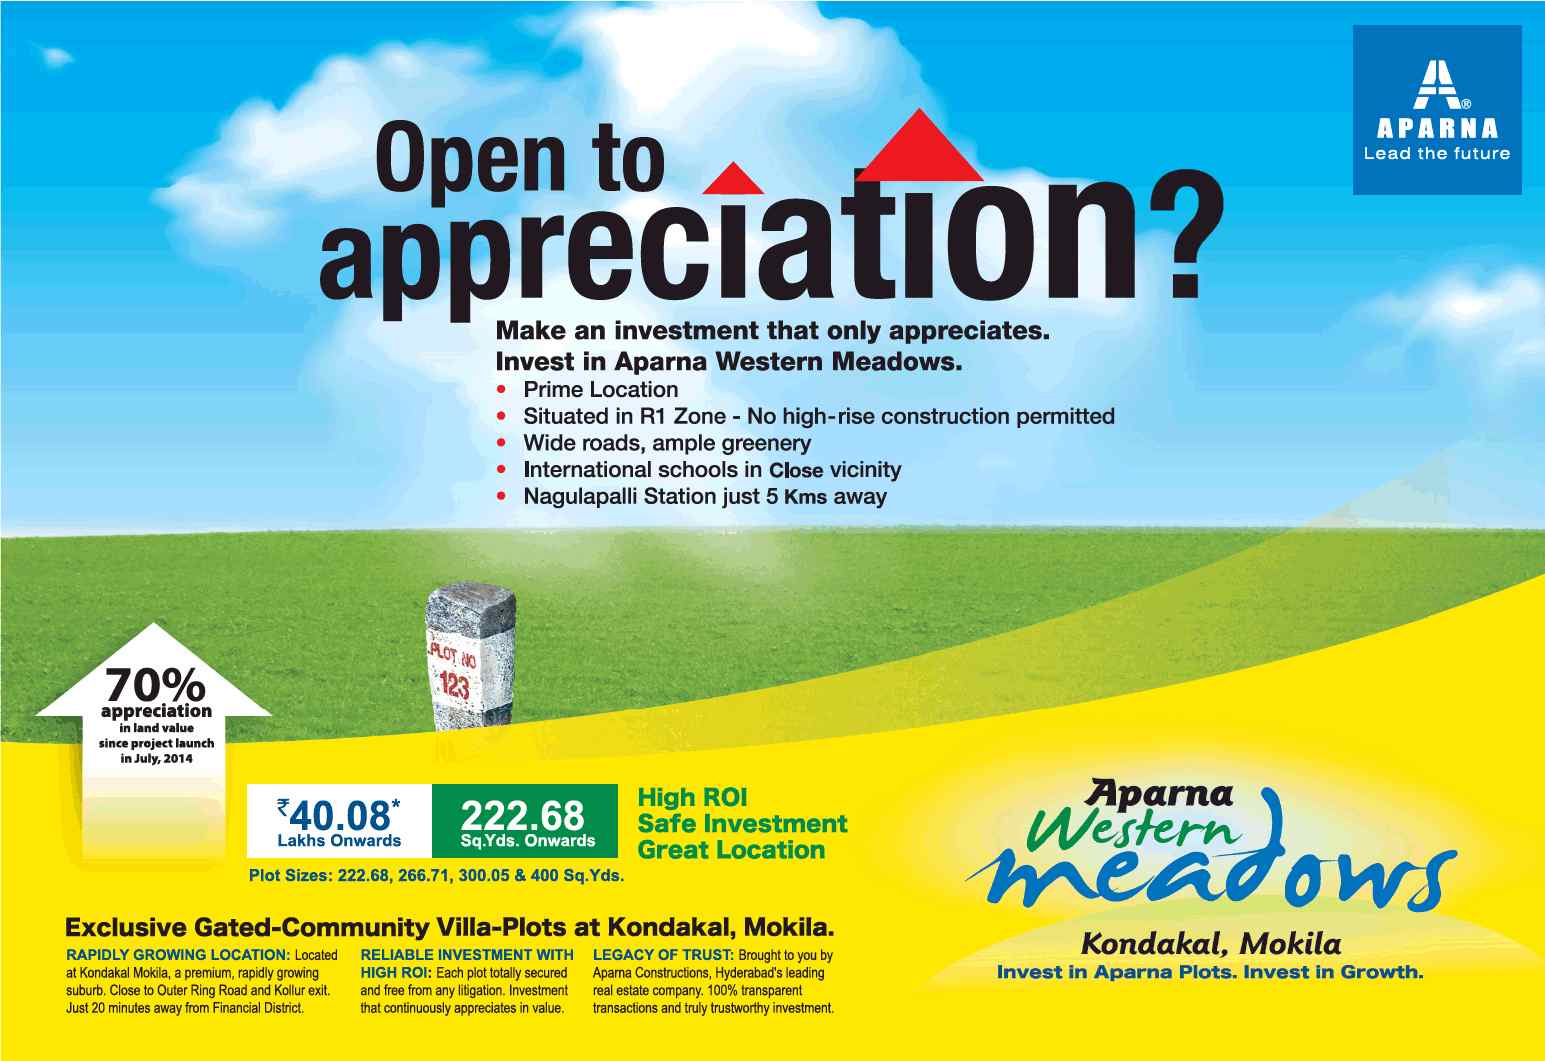 High ROI with safe investment and great location at Aparna Western Meadows in Hyderabad